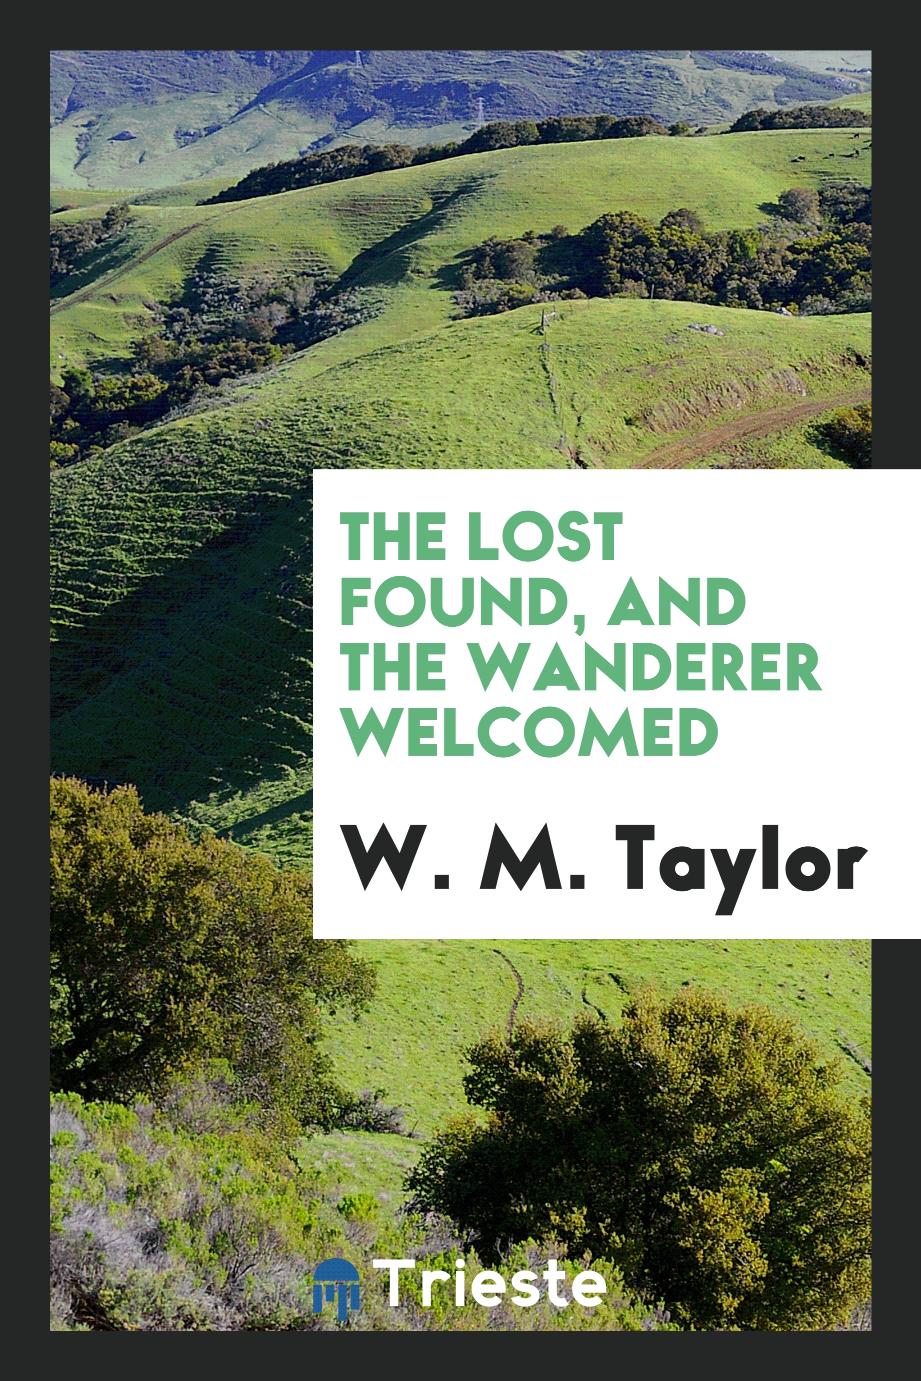 The Lost Found, and the Wanderer Welcomed